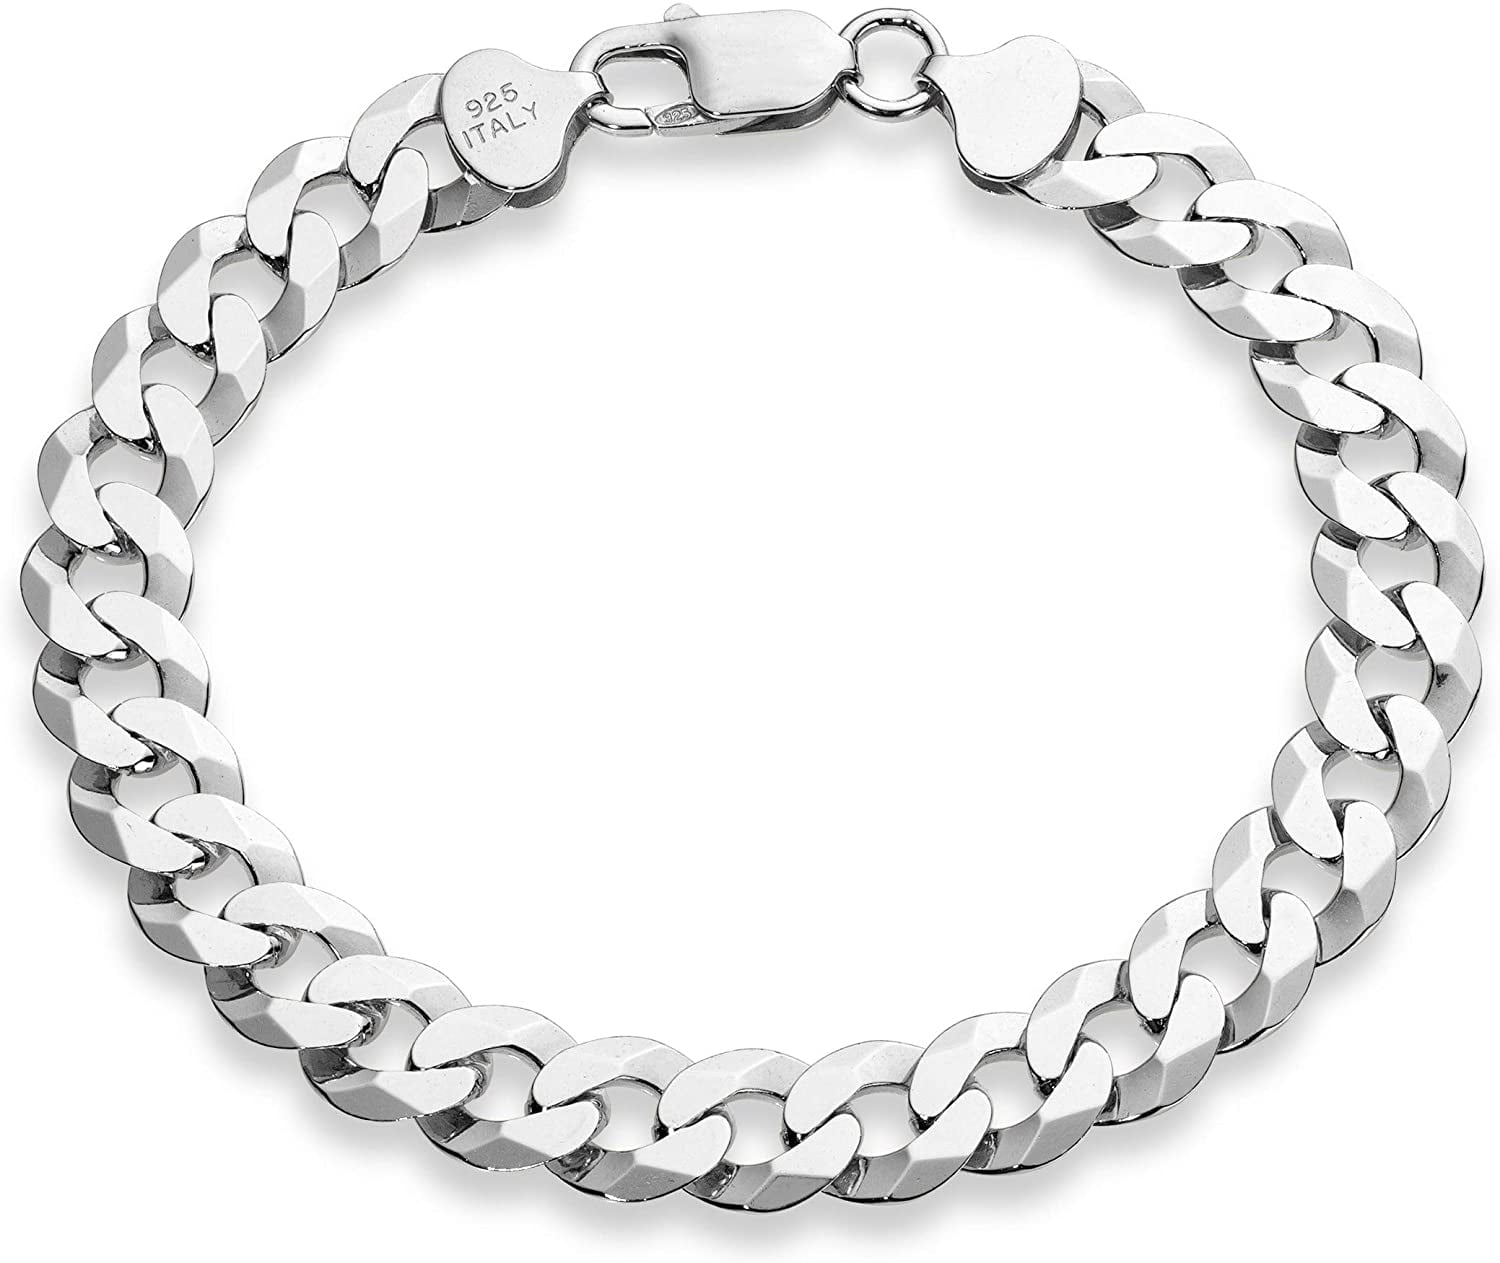 Stainless Steel 18K Gold Pvd Coated Diamond Cut Curb Chain Bracelet   Wholesale Jewelry Website